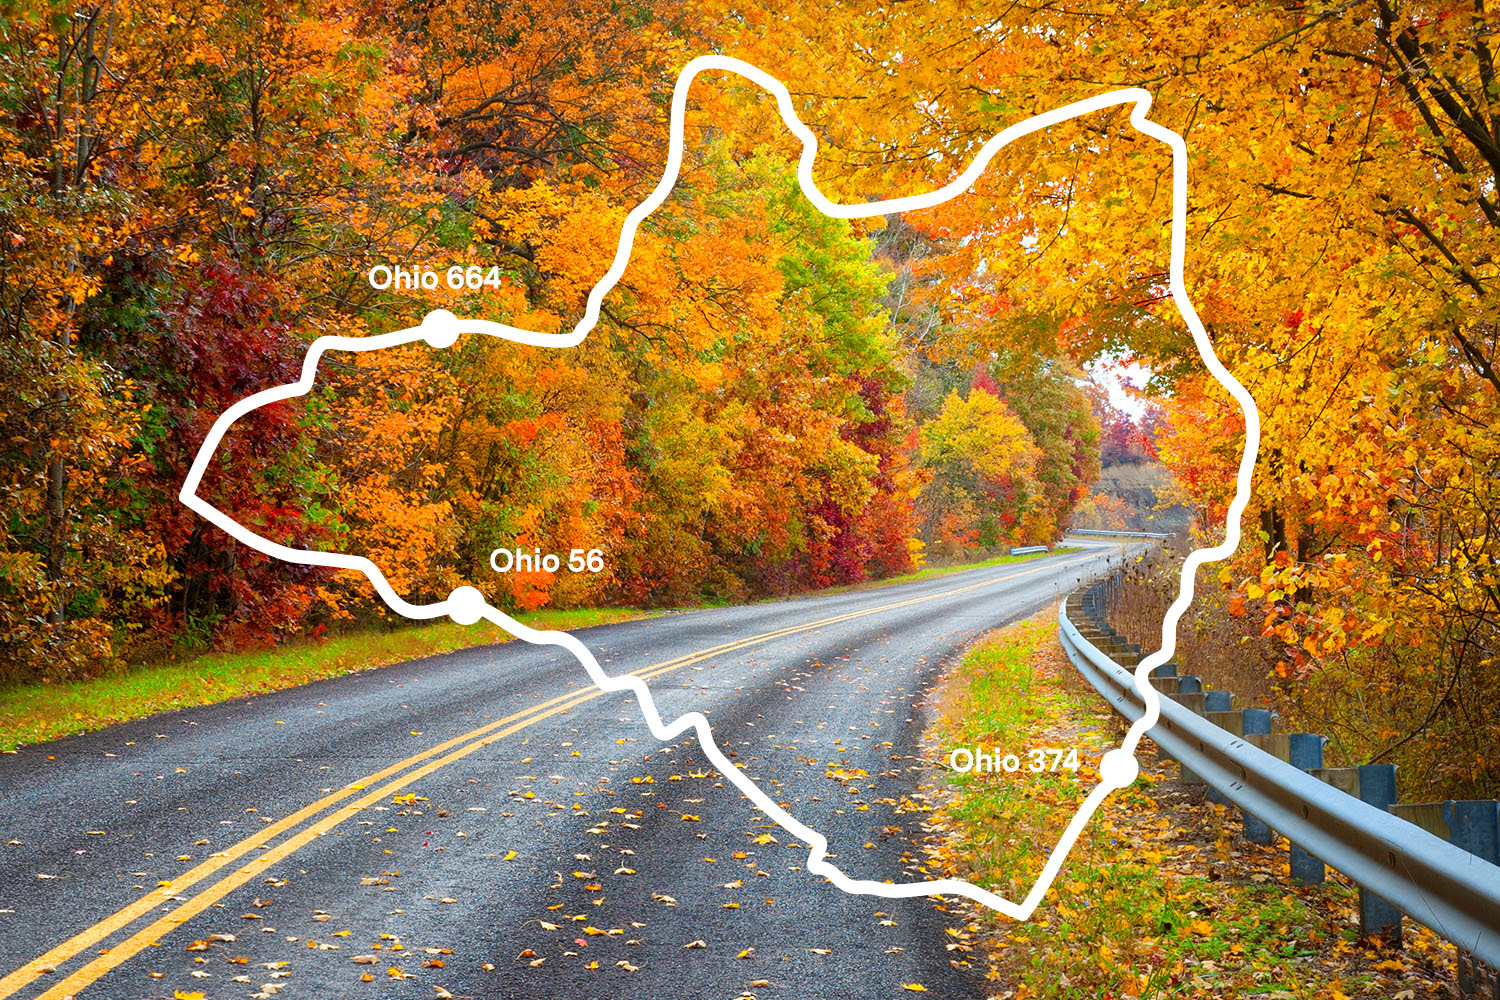 The Best Scenic Drive in the Ohio Valley is OH 664 to 56 to 375, The Hocking Hills Loop